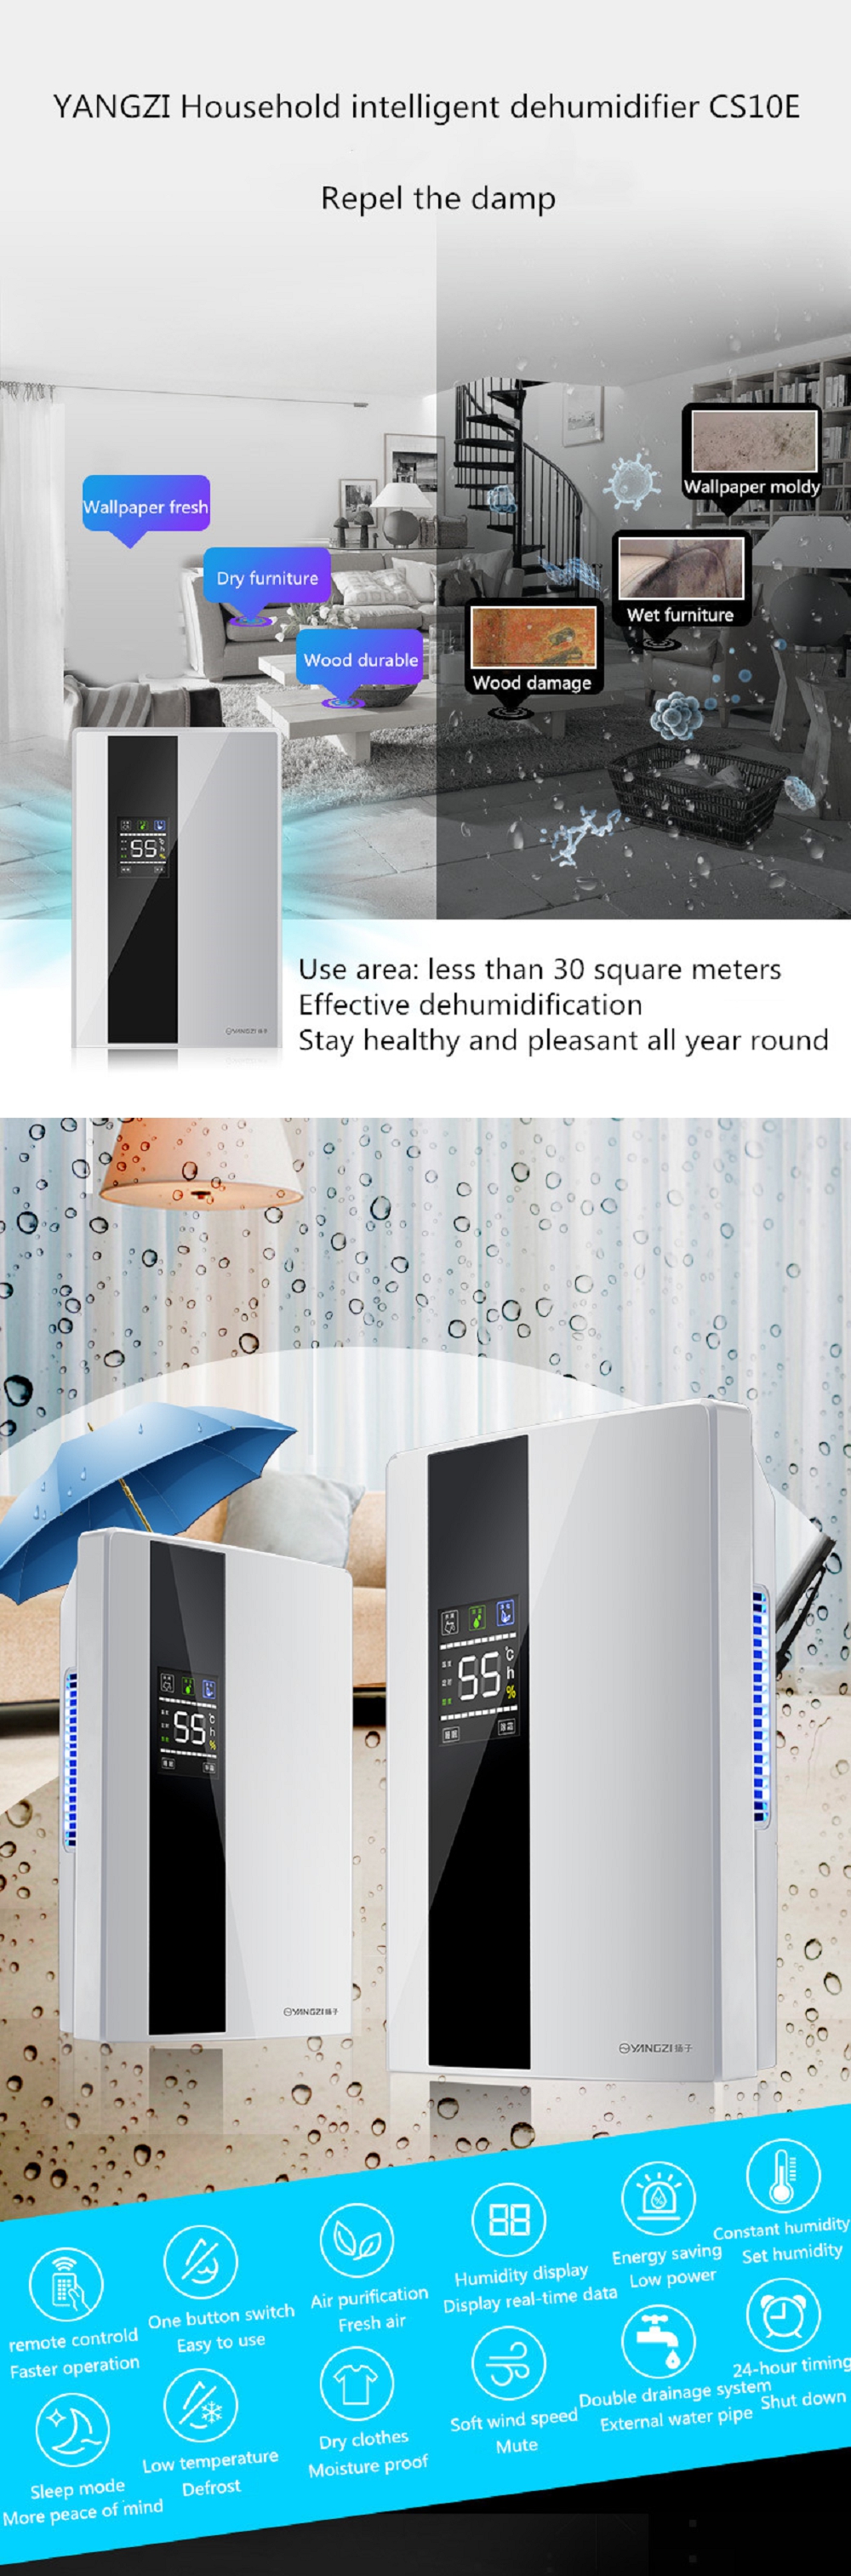 90W-Dehumidifier-Moisture-Absorber-Indoor-Dehumidifier-LCD-Display-Low-Noise-Remote-Control-Timing-E-1702908-1